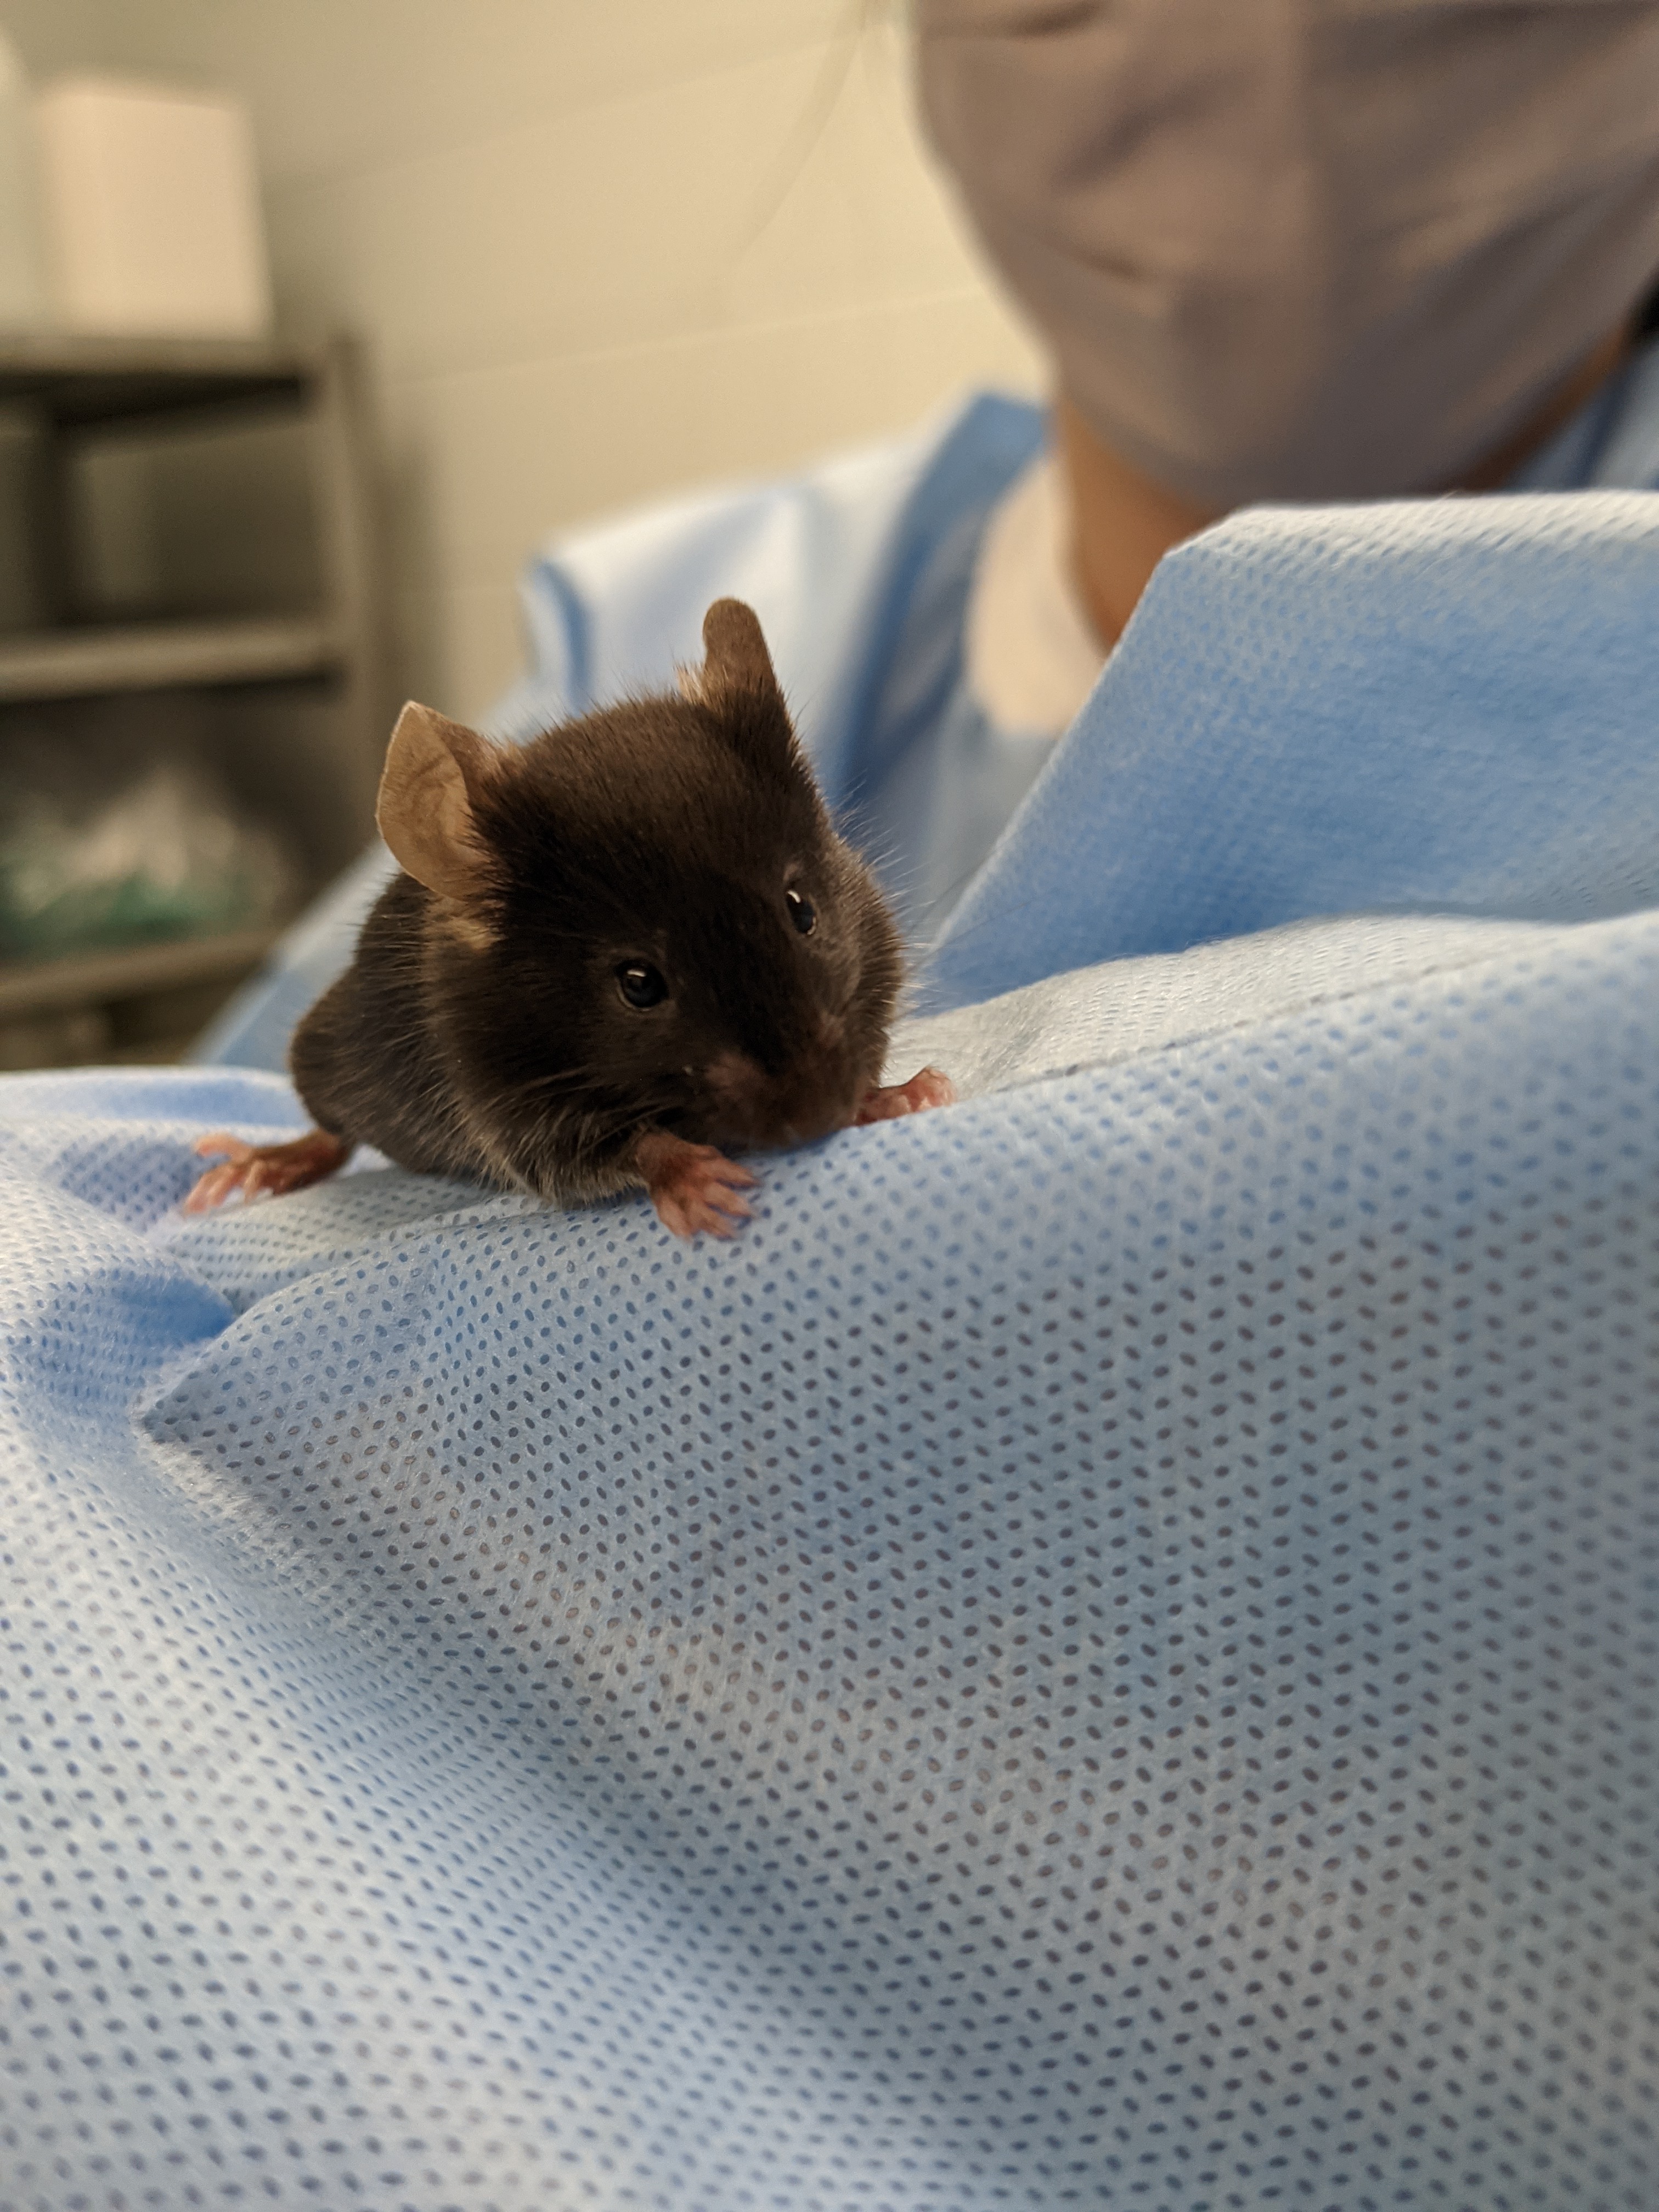 Close-up image of a small, dark brown mouse perched on the arm of a graduate researcher. The person is wearing a face mask and surgical gown.